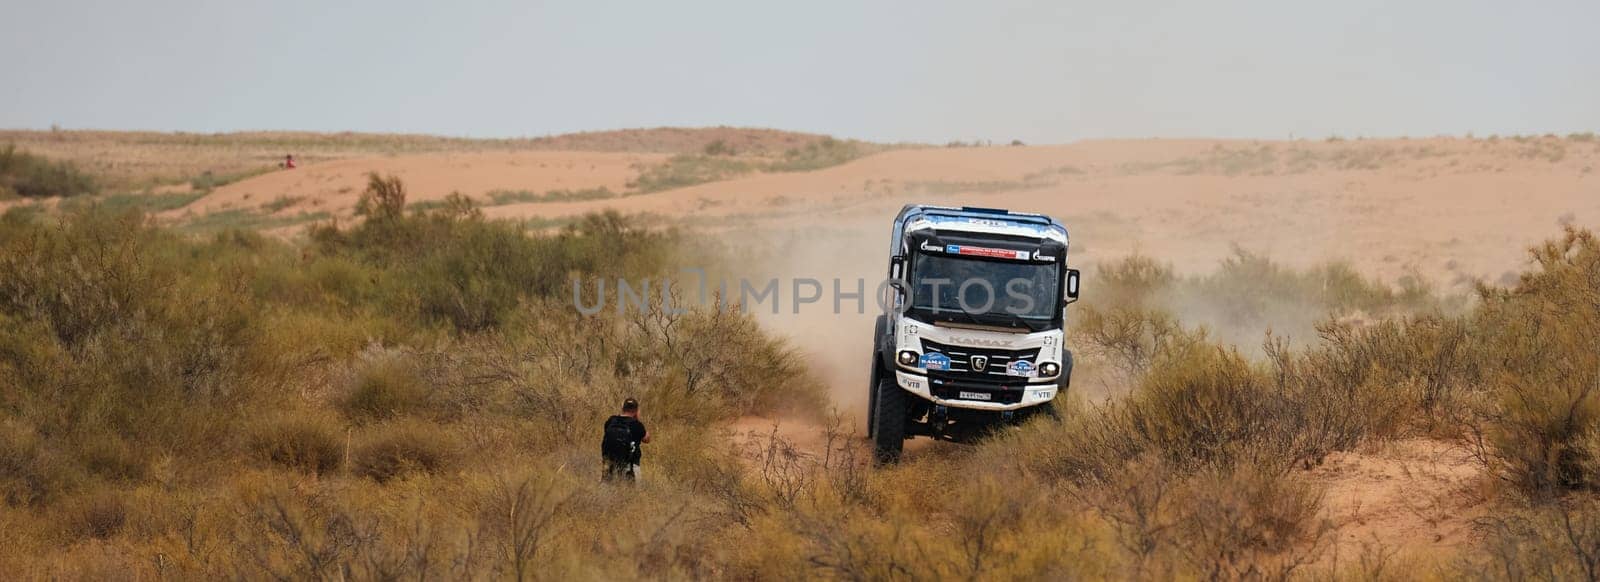 Sports truck KAMAZ gets over the difficult part of the route during the Rally raid in sand. Photographer shoots truck racing. 14.07.2022 Kalmykia, Russia.